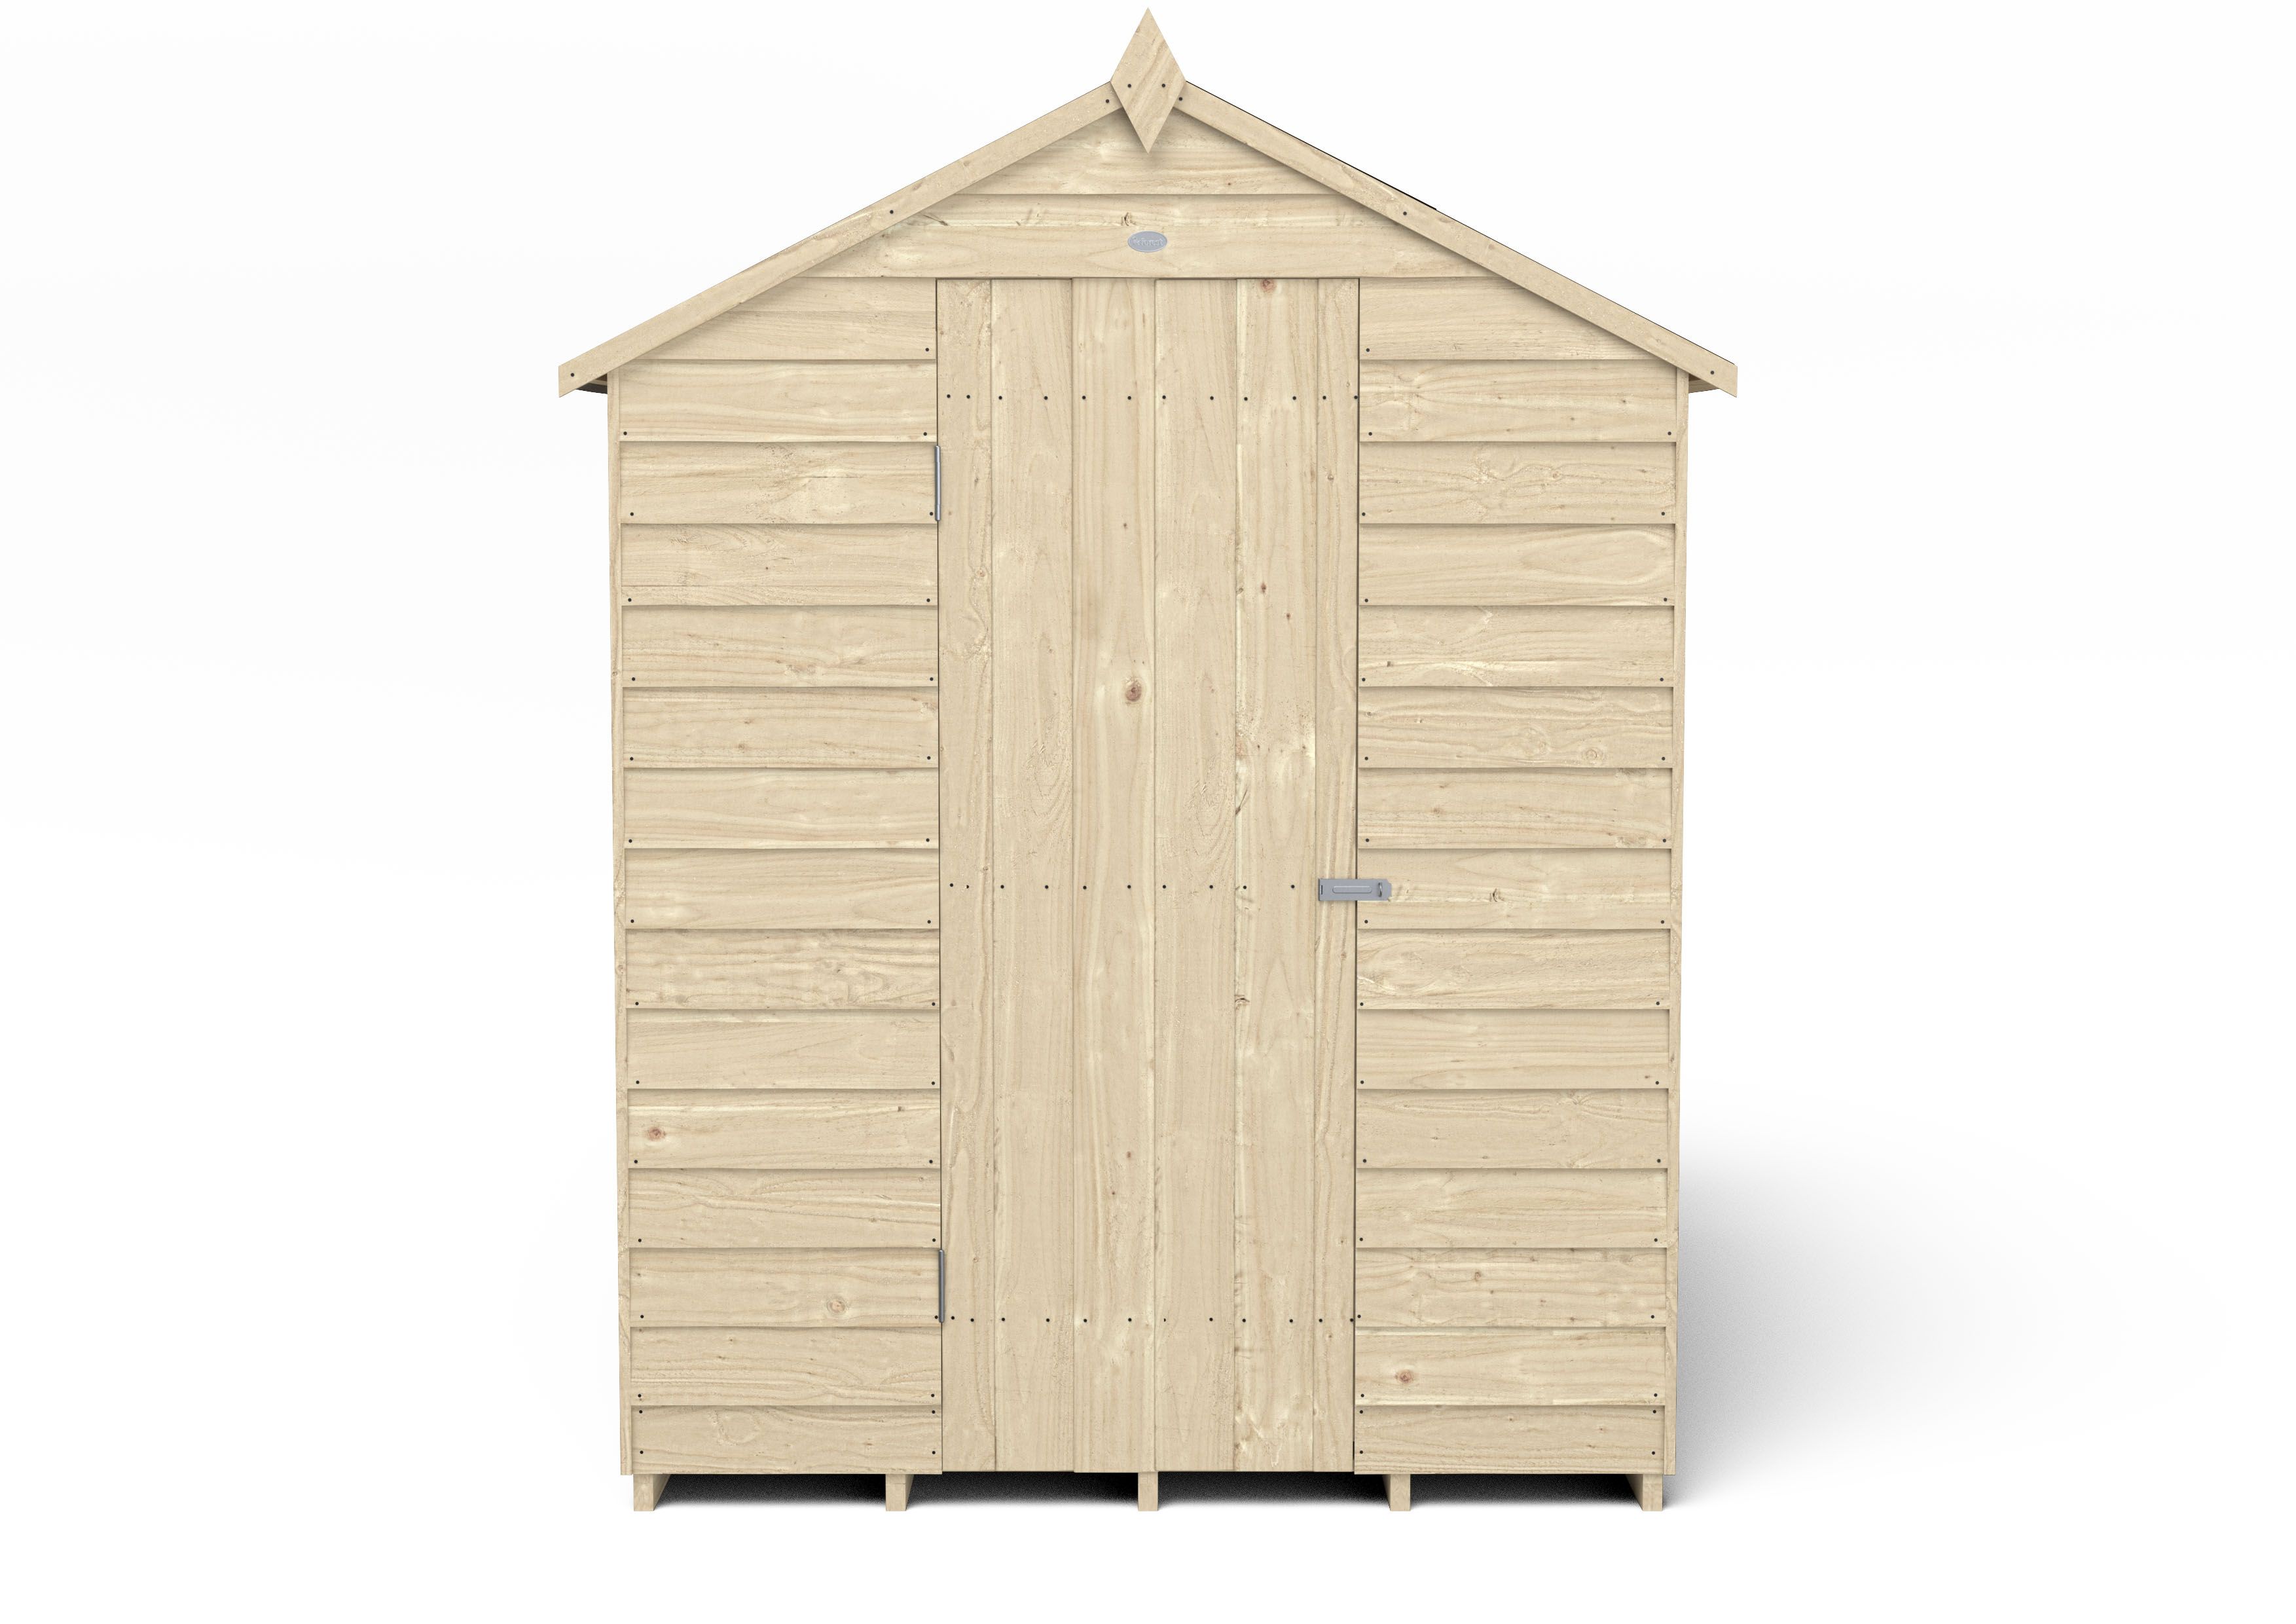 Forest Garden Overlap 7x5 ft Apex Wooden Pressure treated Shed with floor - Assembly service included